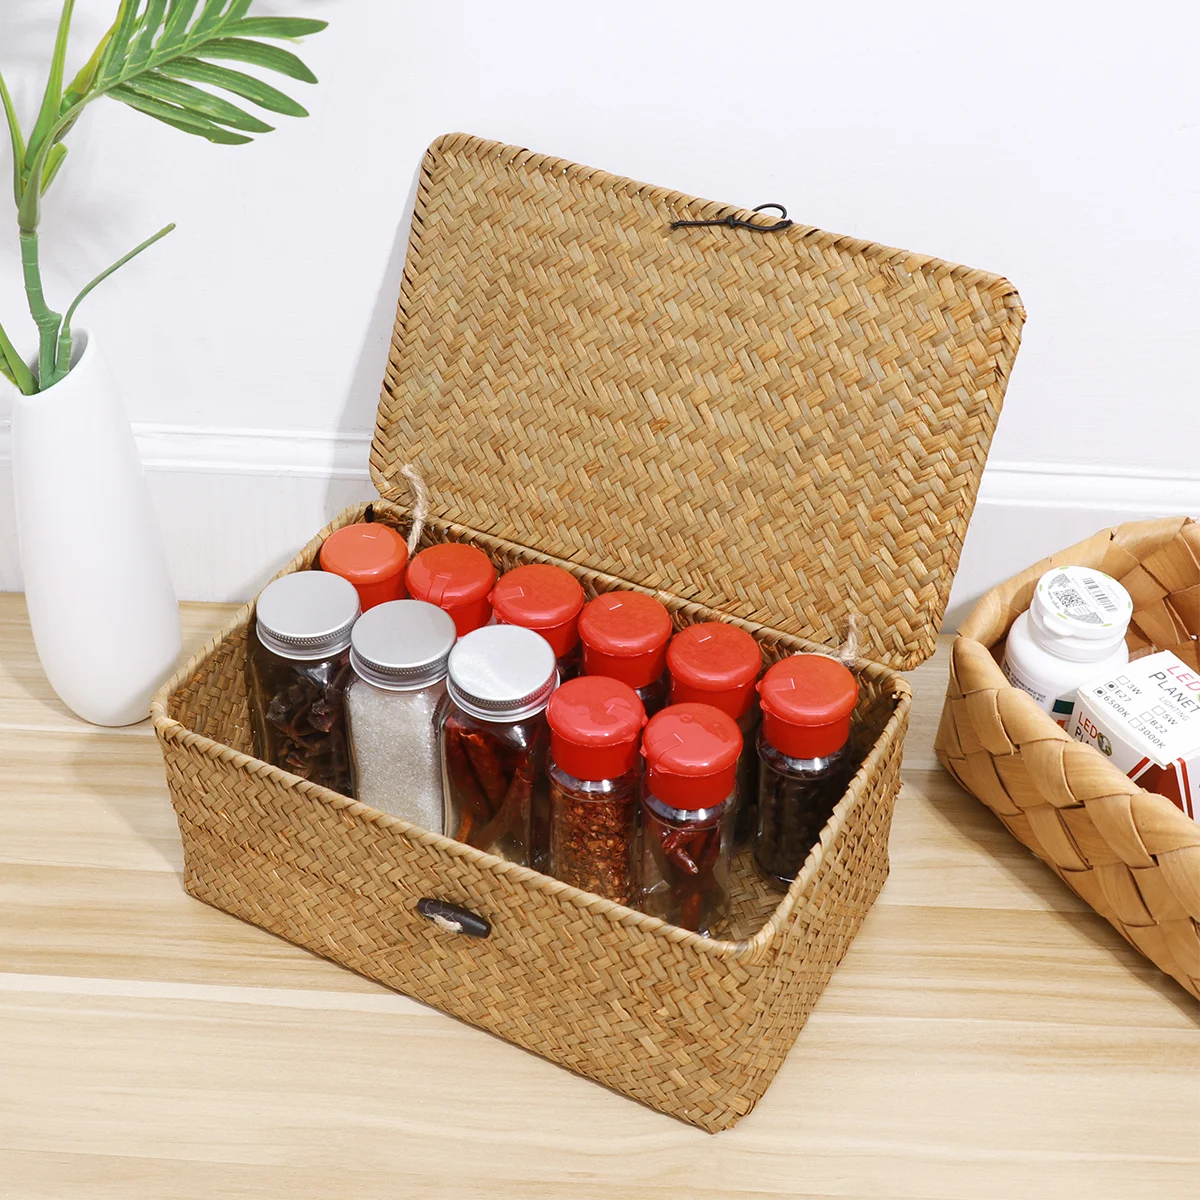 

Storage Basket Woven Baskets With For Box Seaweed Boxes Lid Rattan Desktop Decorative Organizing Lids Straw Small Table